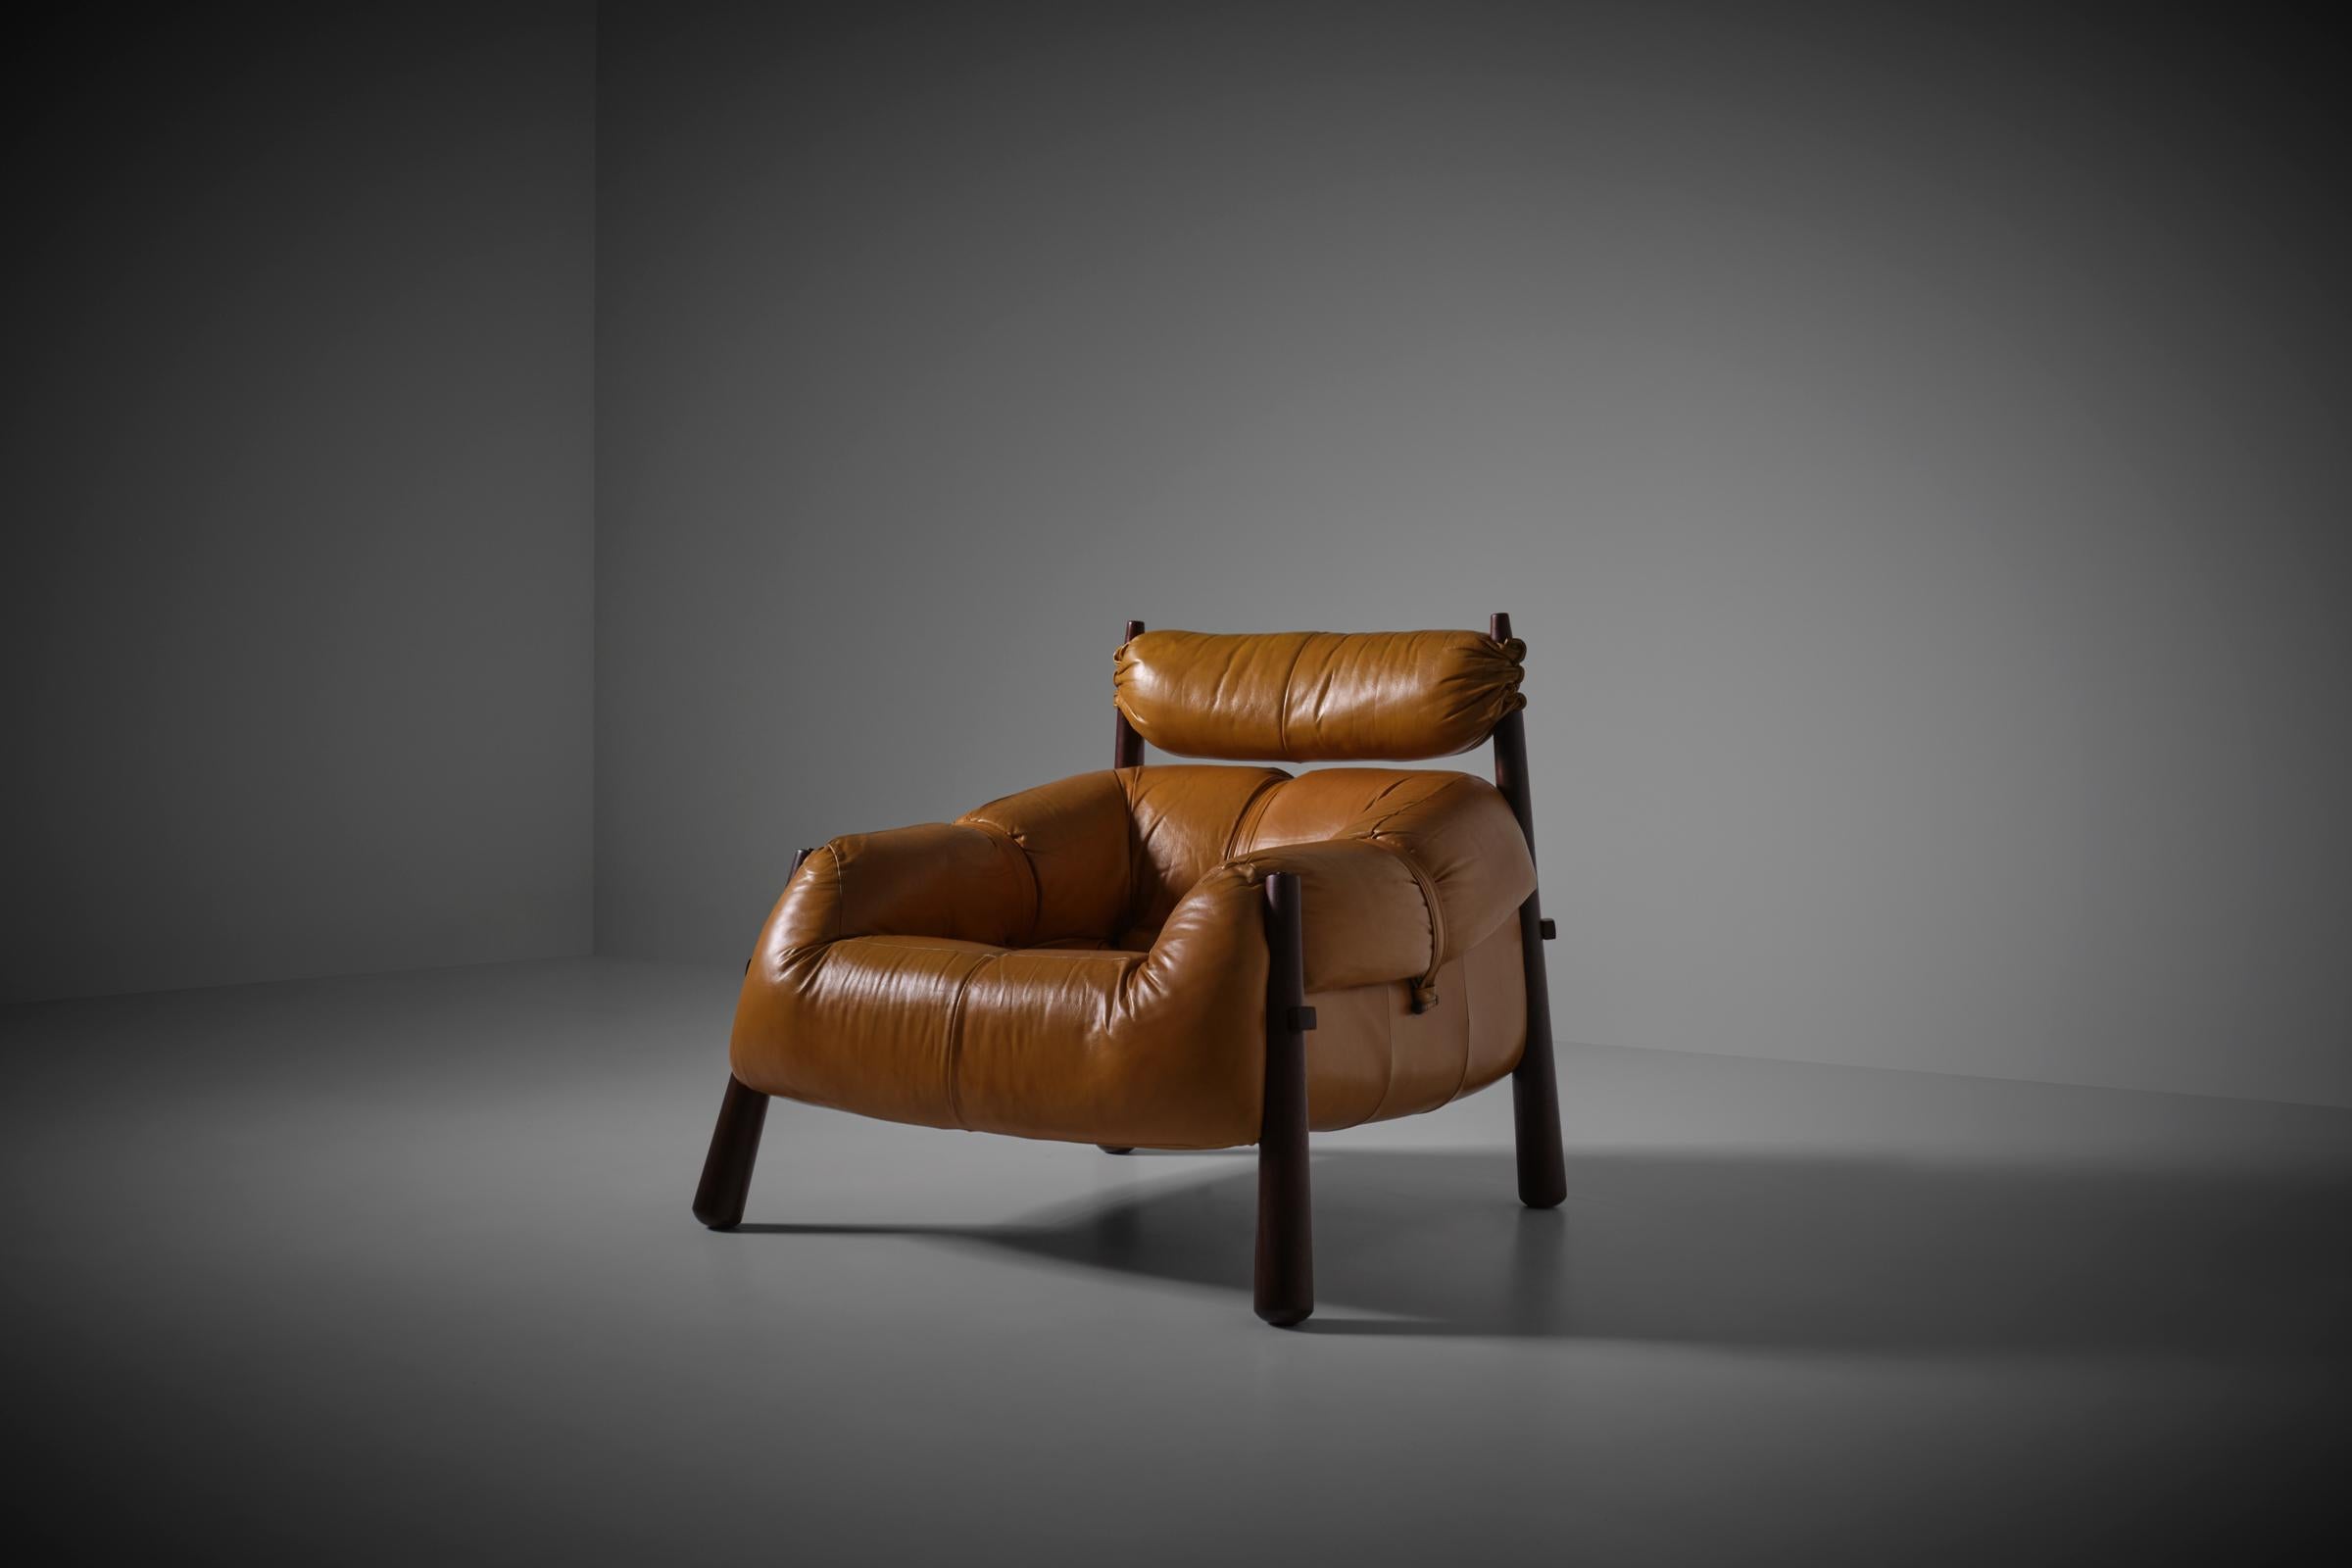 Percival Lafer MP-81 Lounge chair for MP Lafer, Brazil 1972. Outspoken bulky design in a catchy color combination. The chair has its original cognac colored leather which remains in a very good condition; strong and soft, the same counts for the